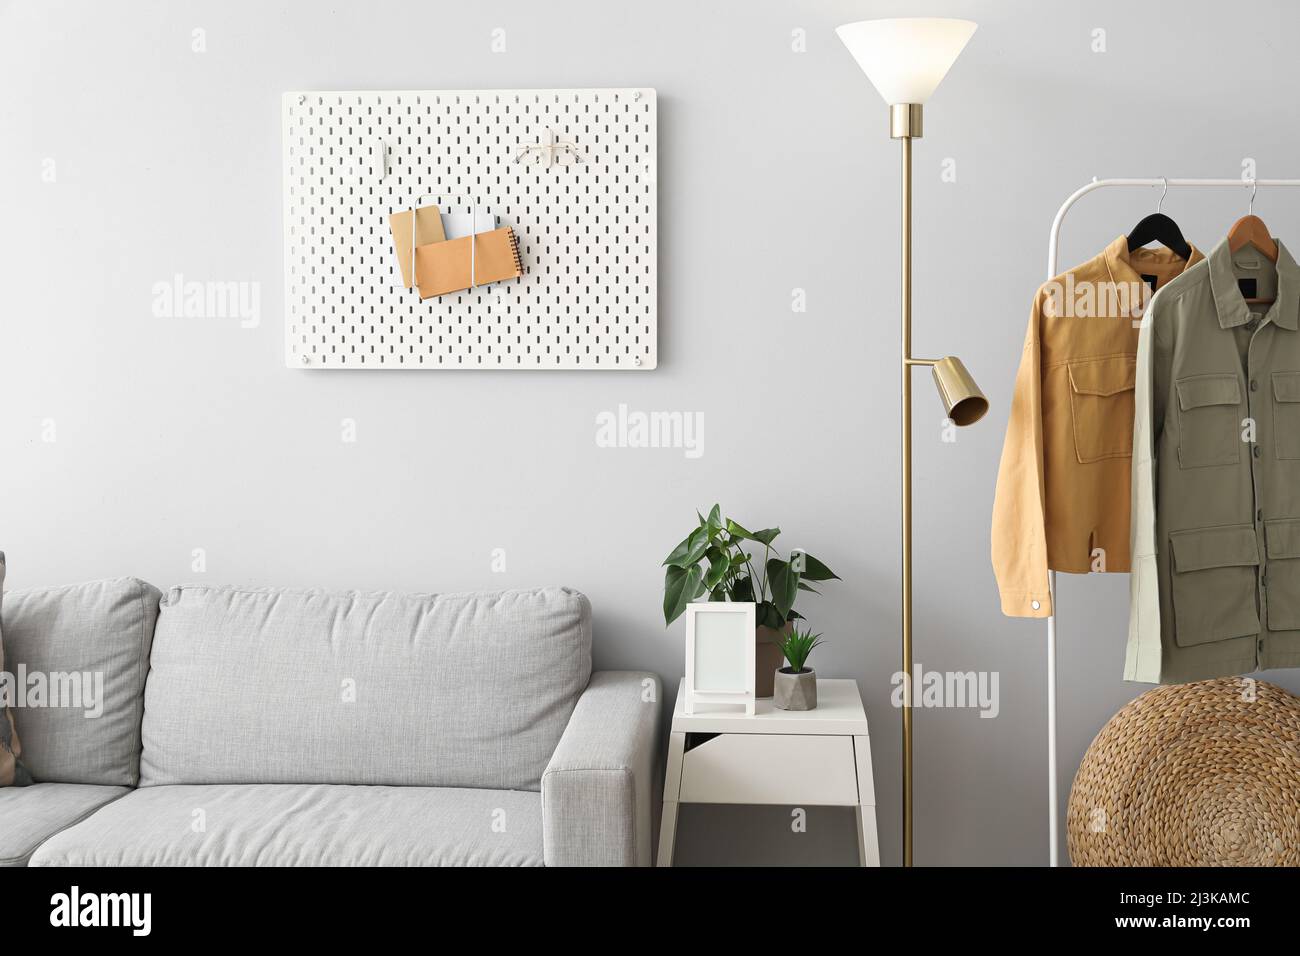 Interior of stylish living room with sofa, glowing lamp and stylish jackets Stock Photo